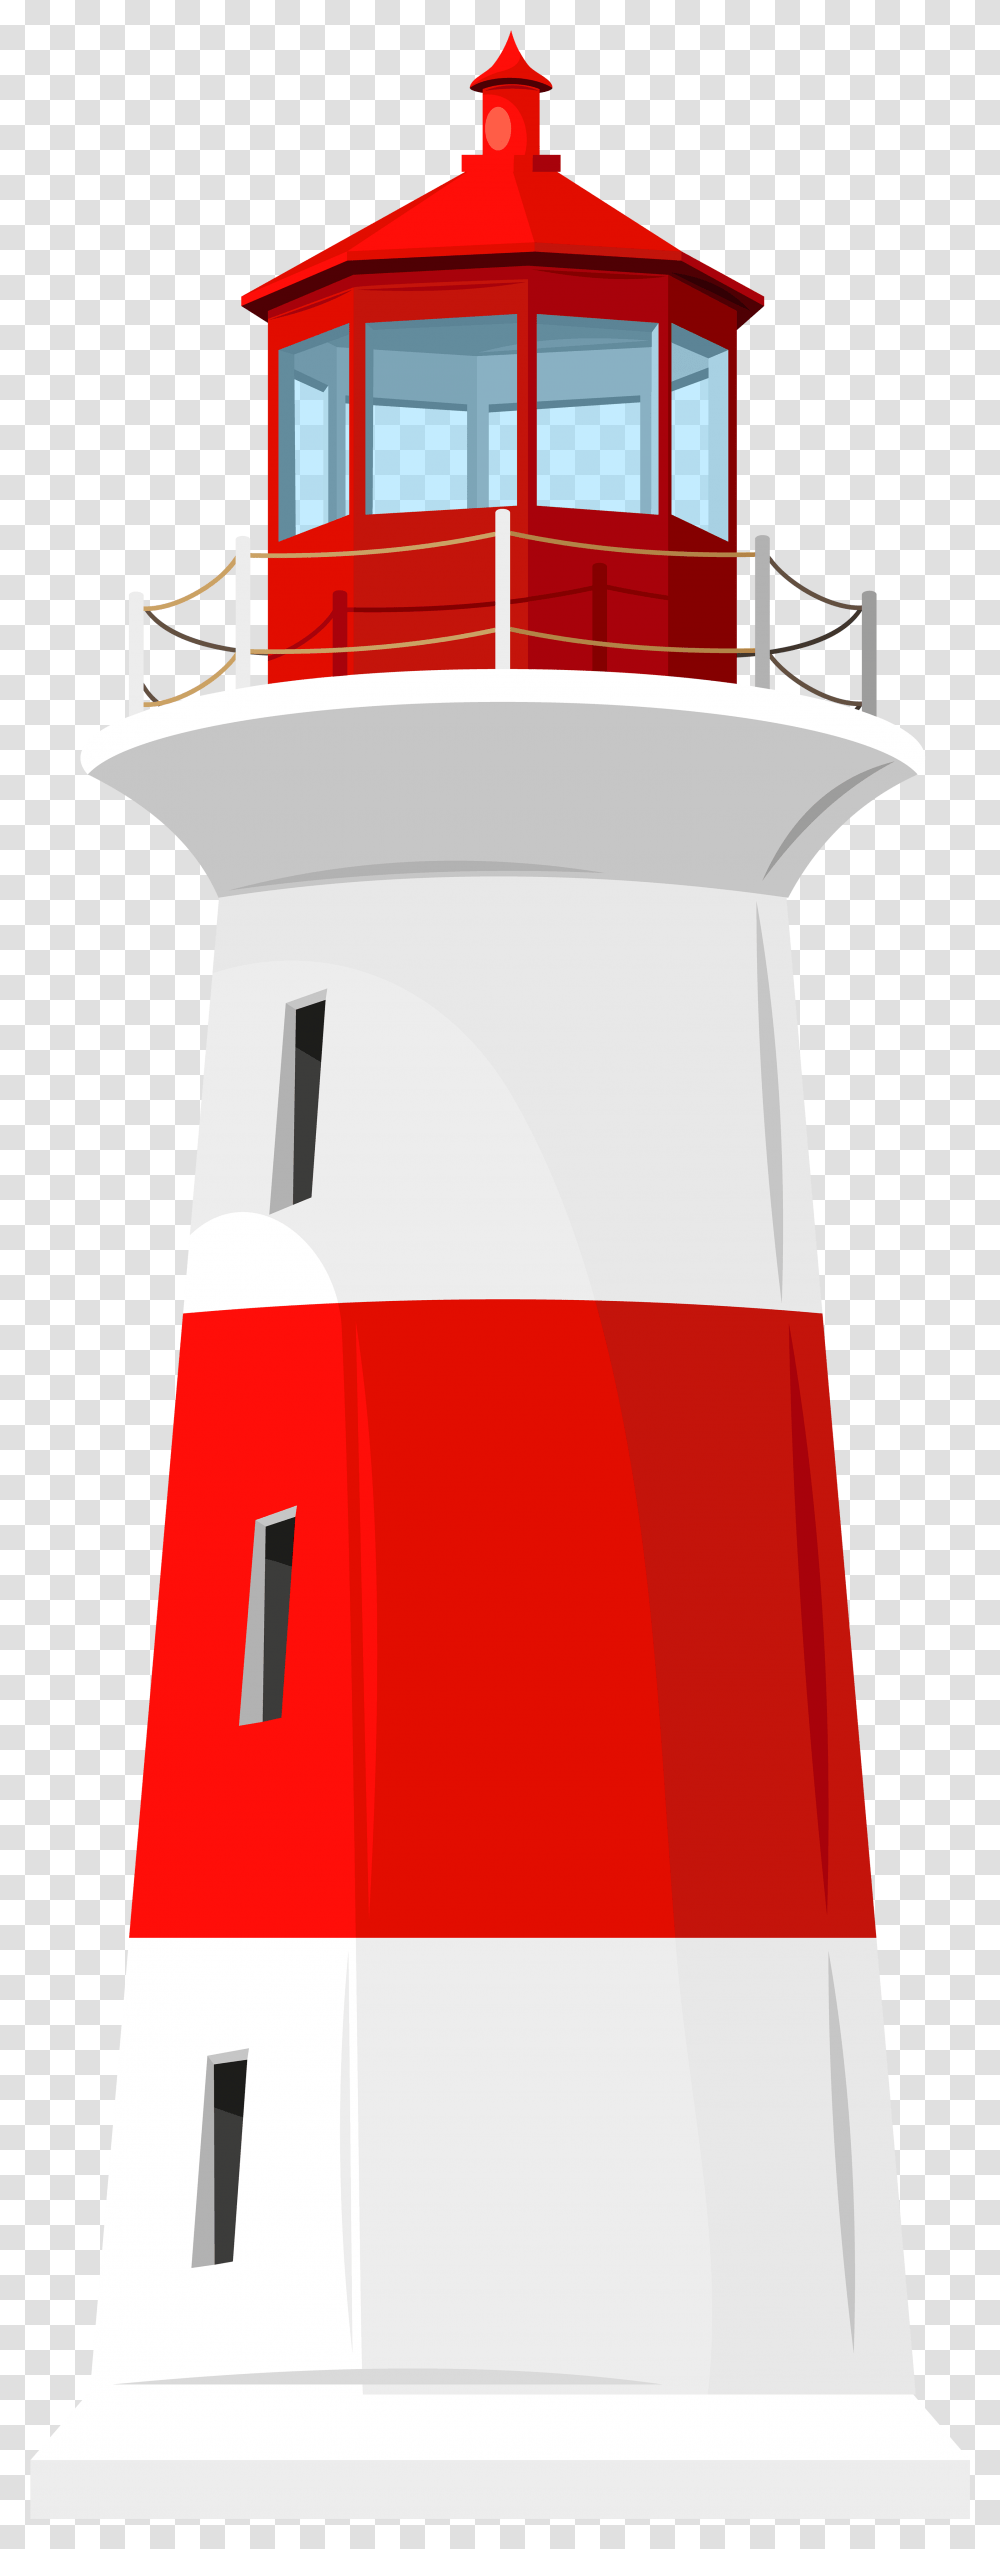 Collection Of Lighthouse Clipart Cartoon Lighthouse, Building, Mailbox, Architecture, Tower Transparent Png